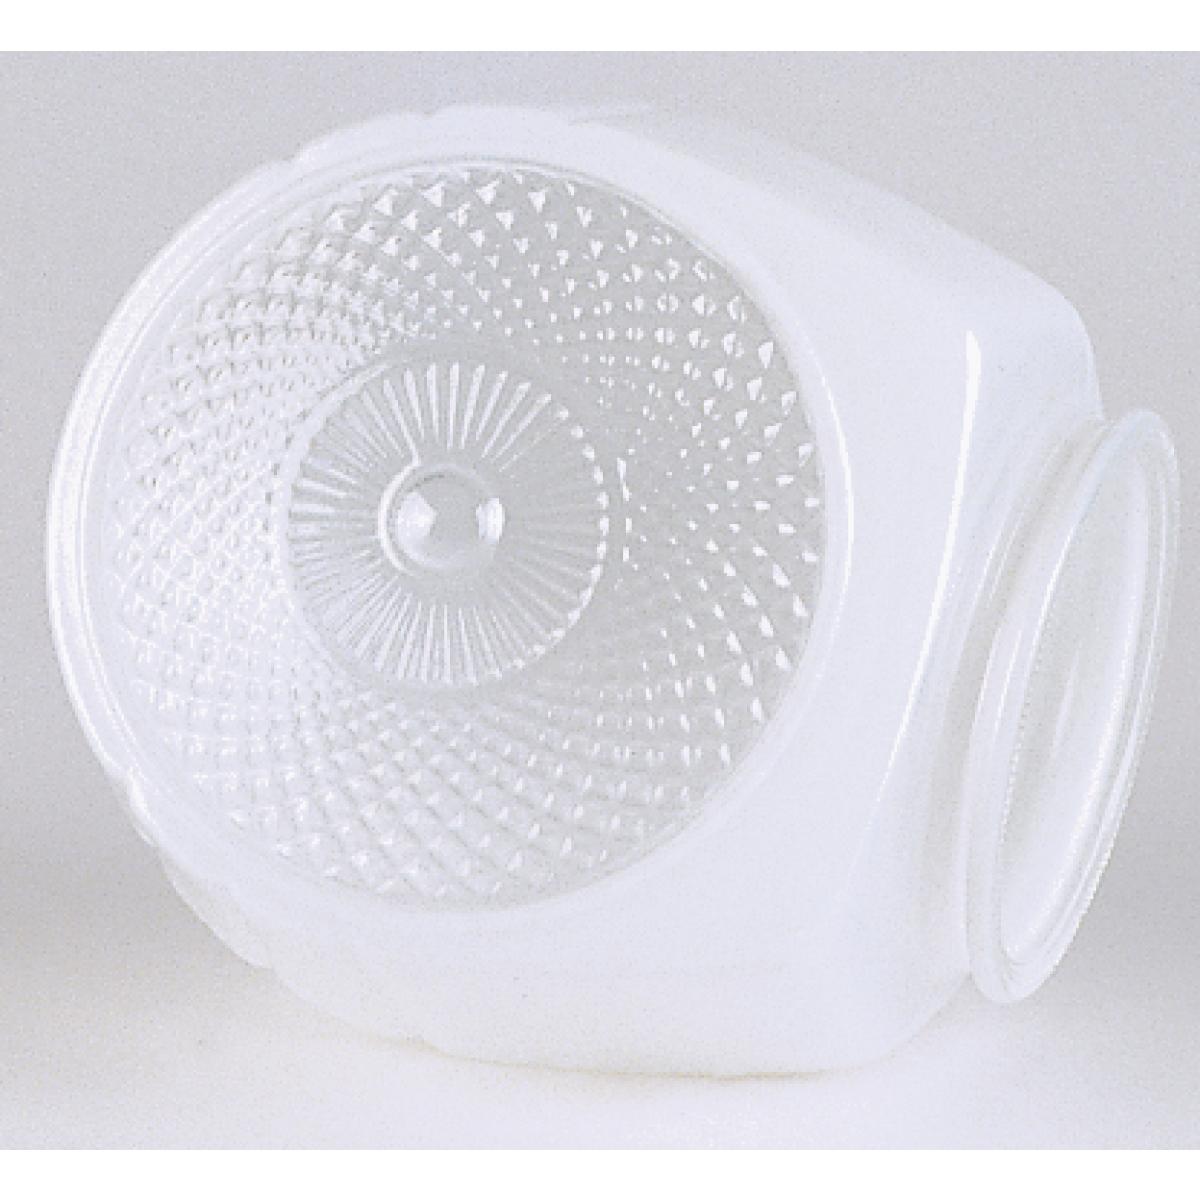 Satco 50-111 White/Clear Glass Bath Shade 5-1/4 in. Diameter 3-1/4 in. Fitter 4-1/2 in. Height 5-13/16 in. Depth